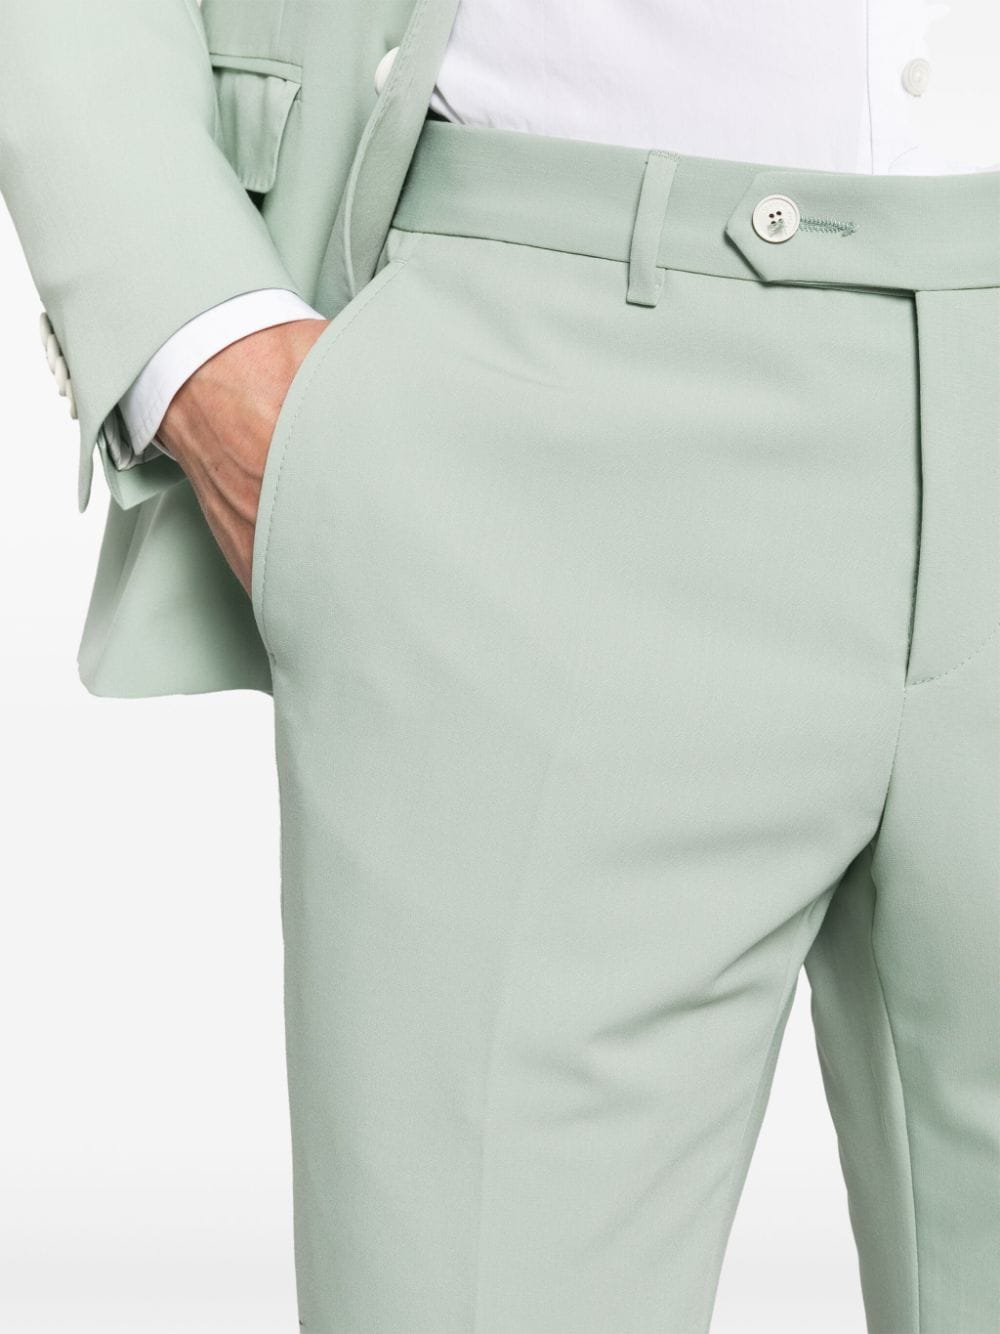 Stretch water green single-breasted suit